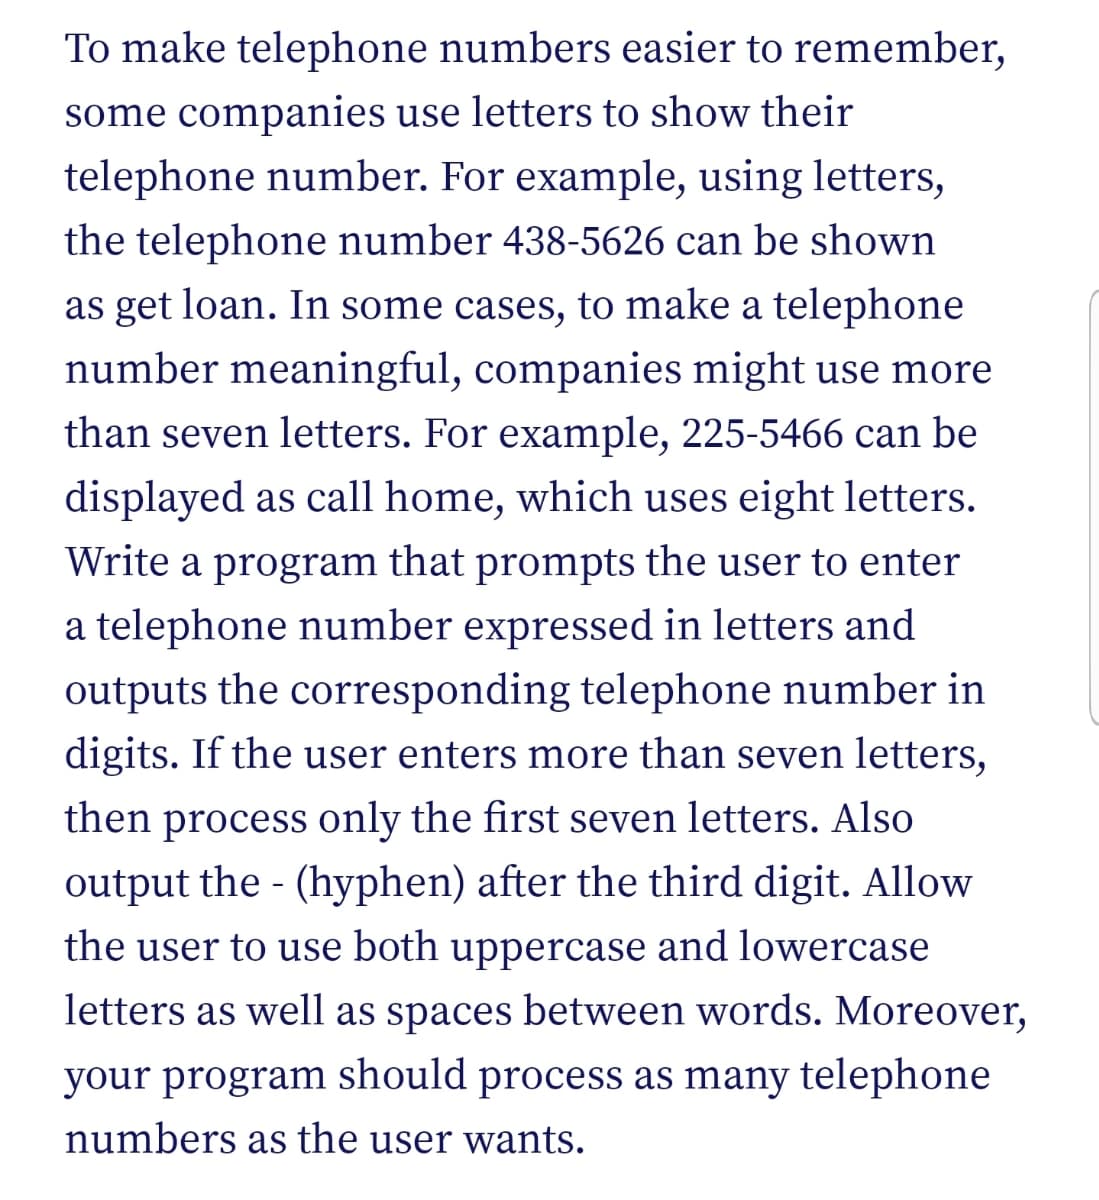 To make telephone numbers easier to remember,
some companies use letters to show their
telephone number. For example, using letters,
the telephone number 438-5626 can be shown
as get loan. In some cases, to make a telephone
number meaningful, companies might use more
than seven letters. For example, 225-5466 can be
displayed as call home, which uses eight letters.
Write a program that prompts the user to enter
a telephone number expressed in letters and
outputs the corresponding telephone number in
digits. If the user enters more than seven letters,
then process only the first seven letters. Also
output the - (hyphen) after the third digit. Allow
the user to use both uppercase and lowercase
letters as well as spaces between words. Moreover,
your program should process as many telephone
numbers as the user wants.
